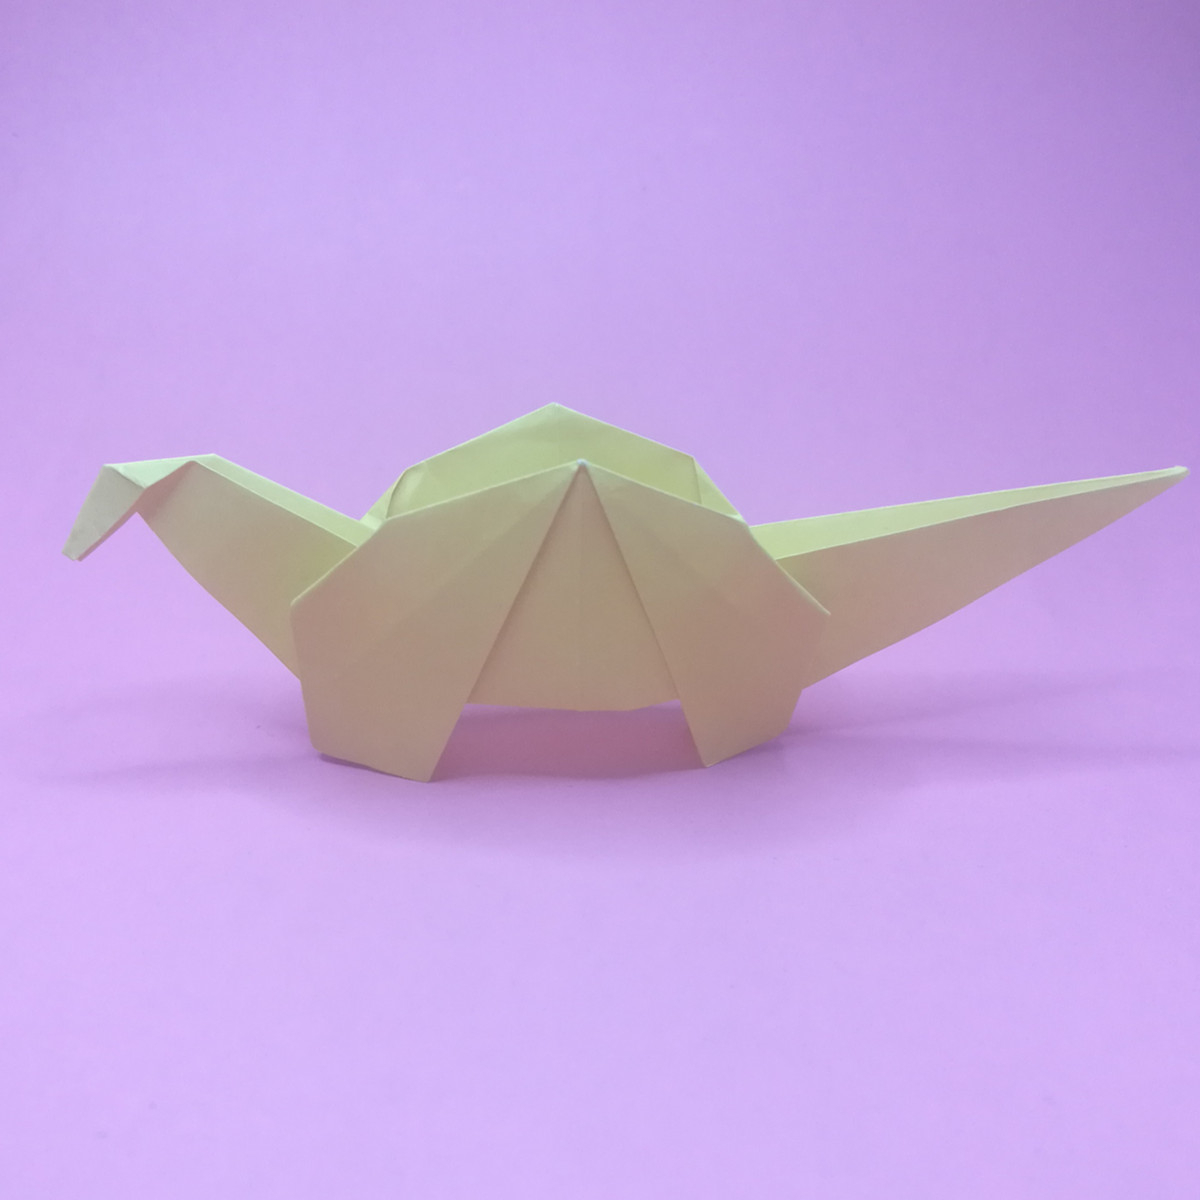 How To Do An Origami Dragon How To Make An Origami Dragon Origami Dragon Instructions